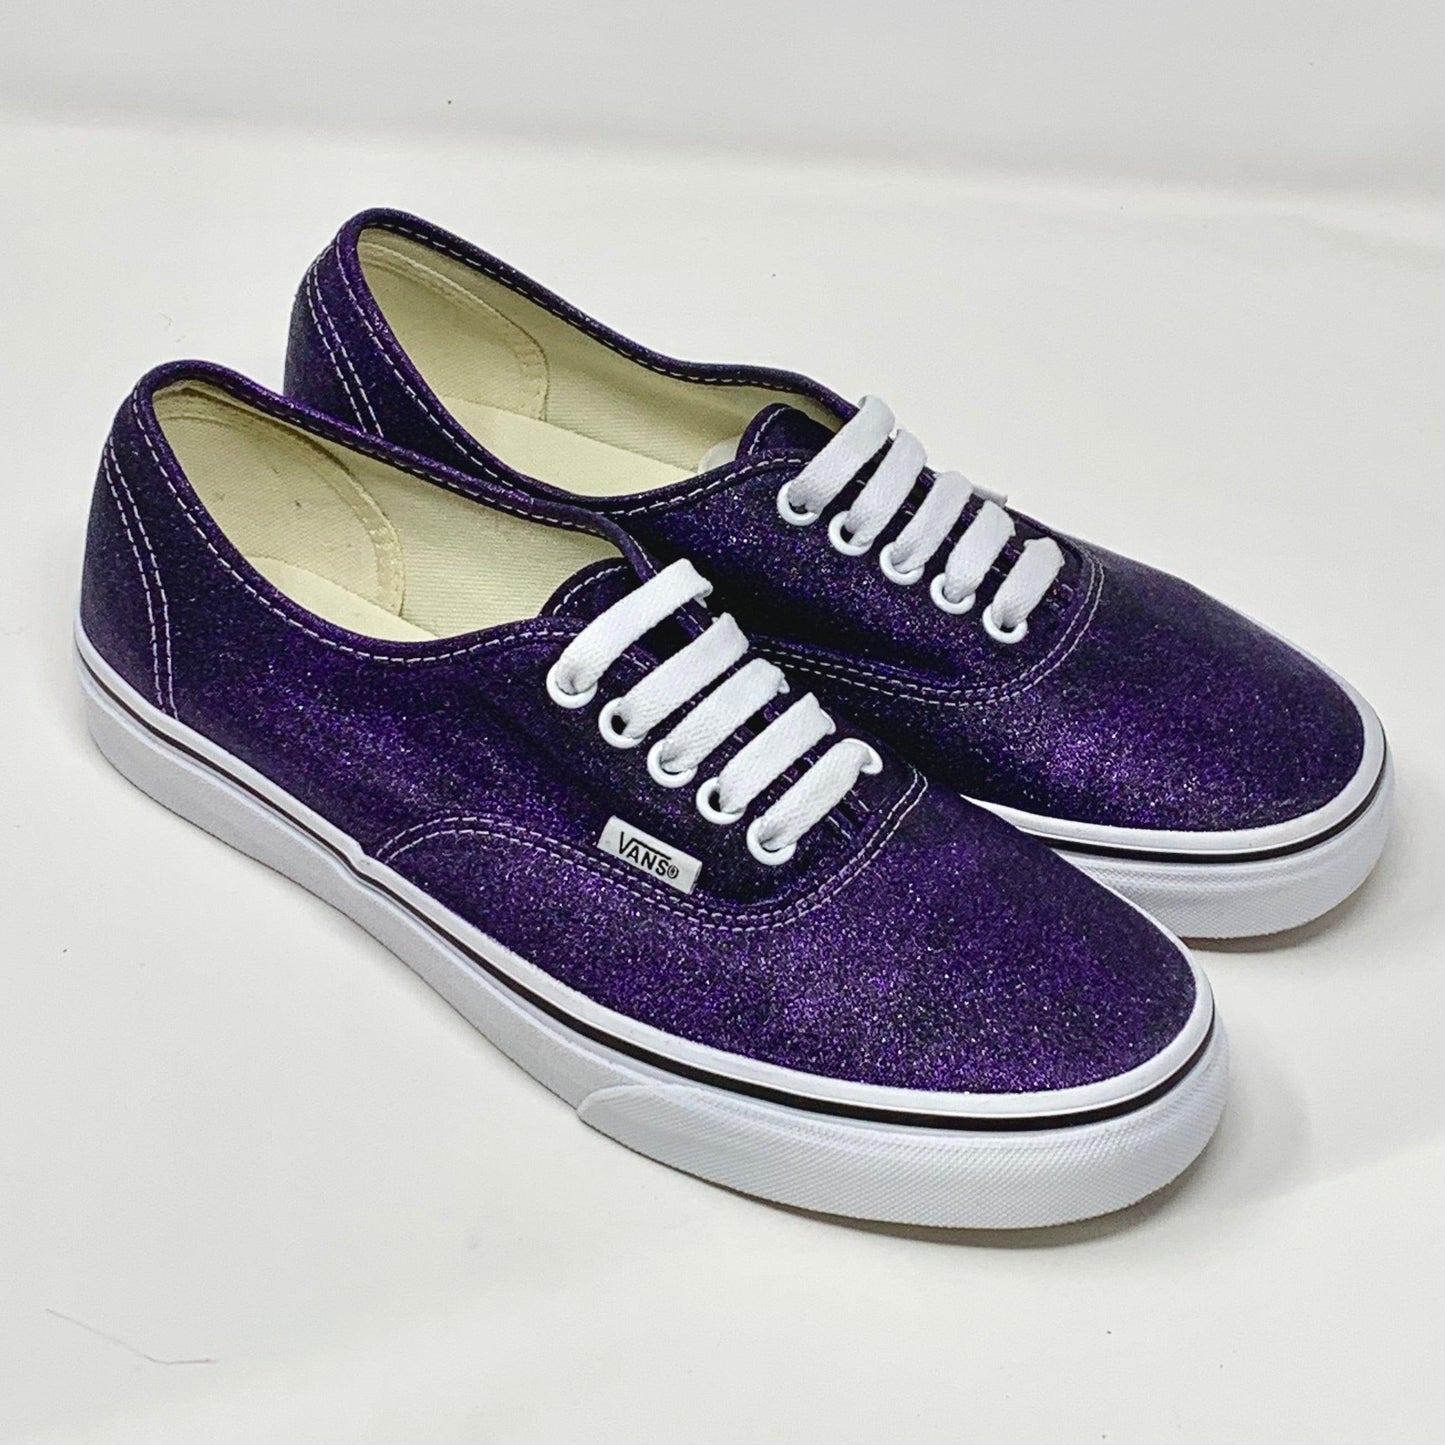 Purple Glitter Shoes - ButterMakesMeHappy